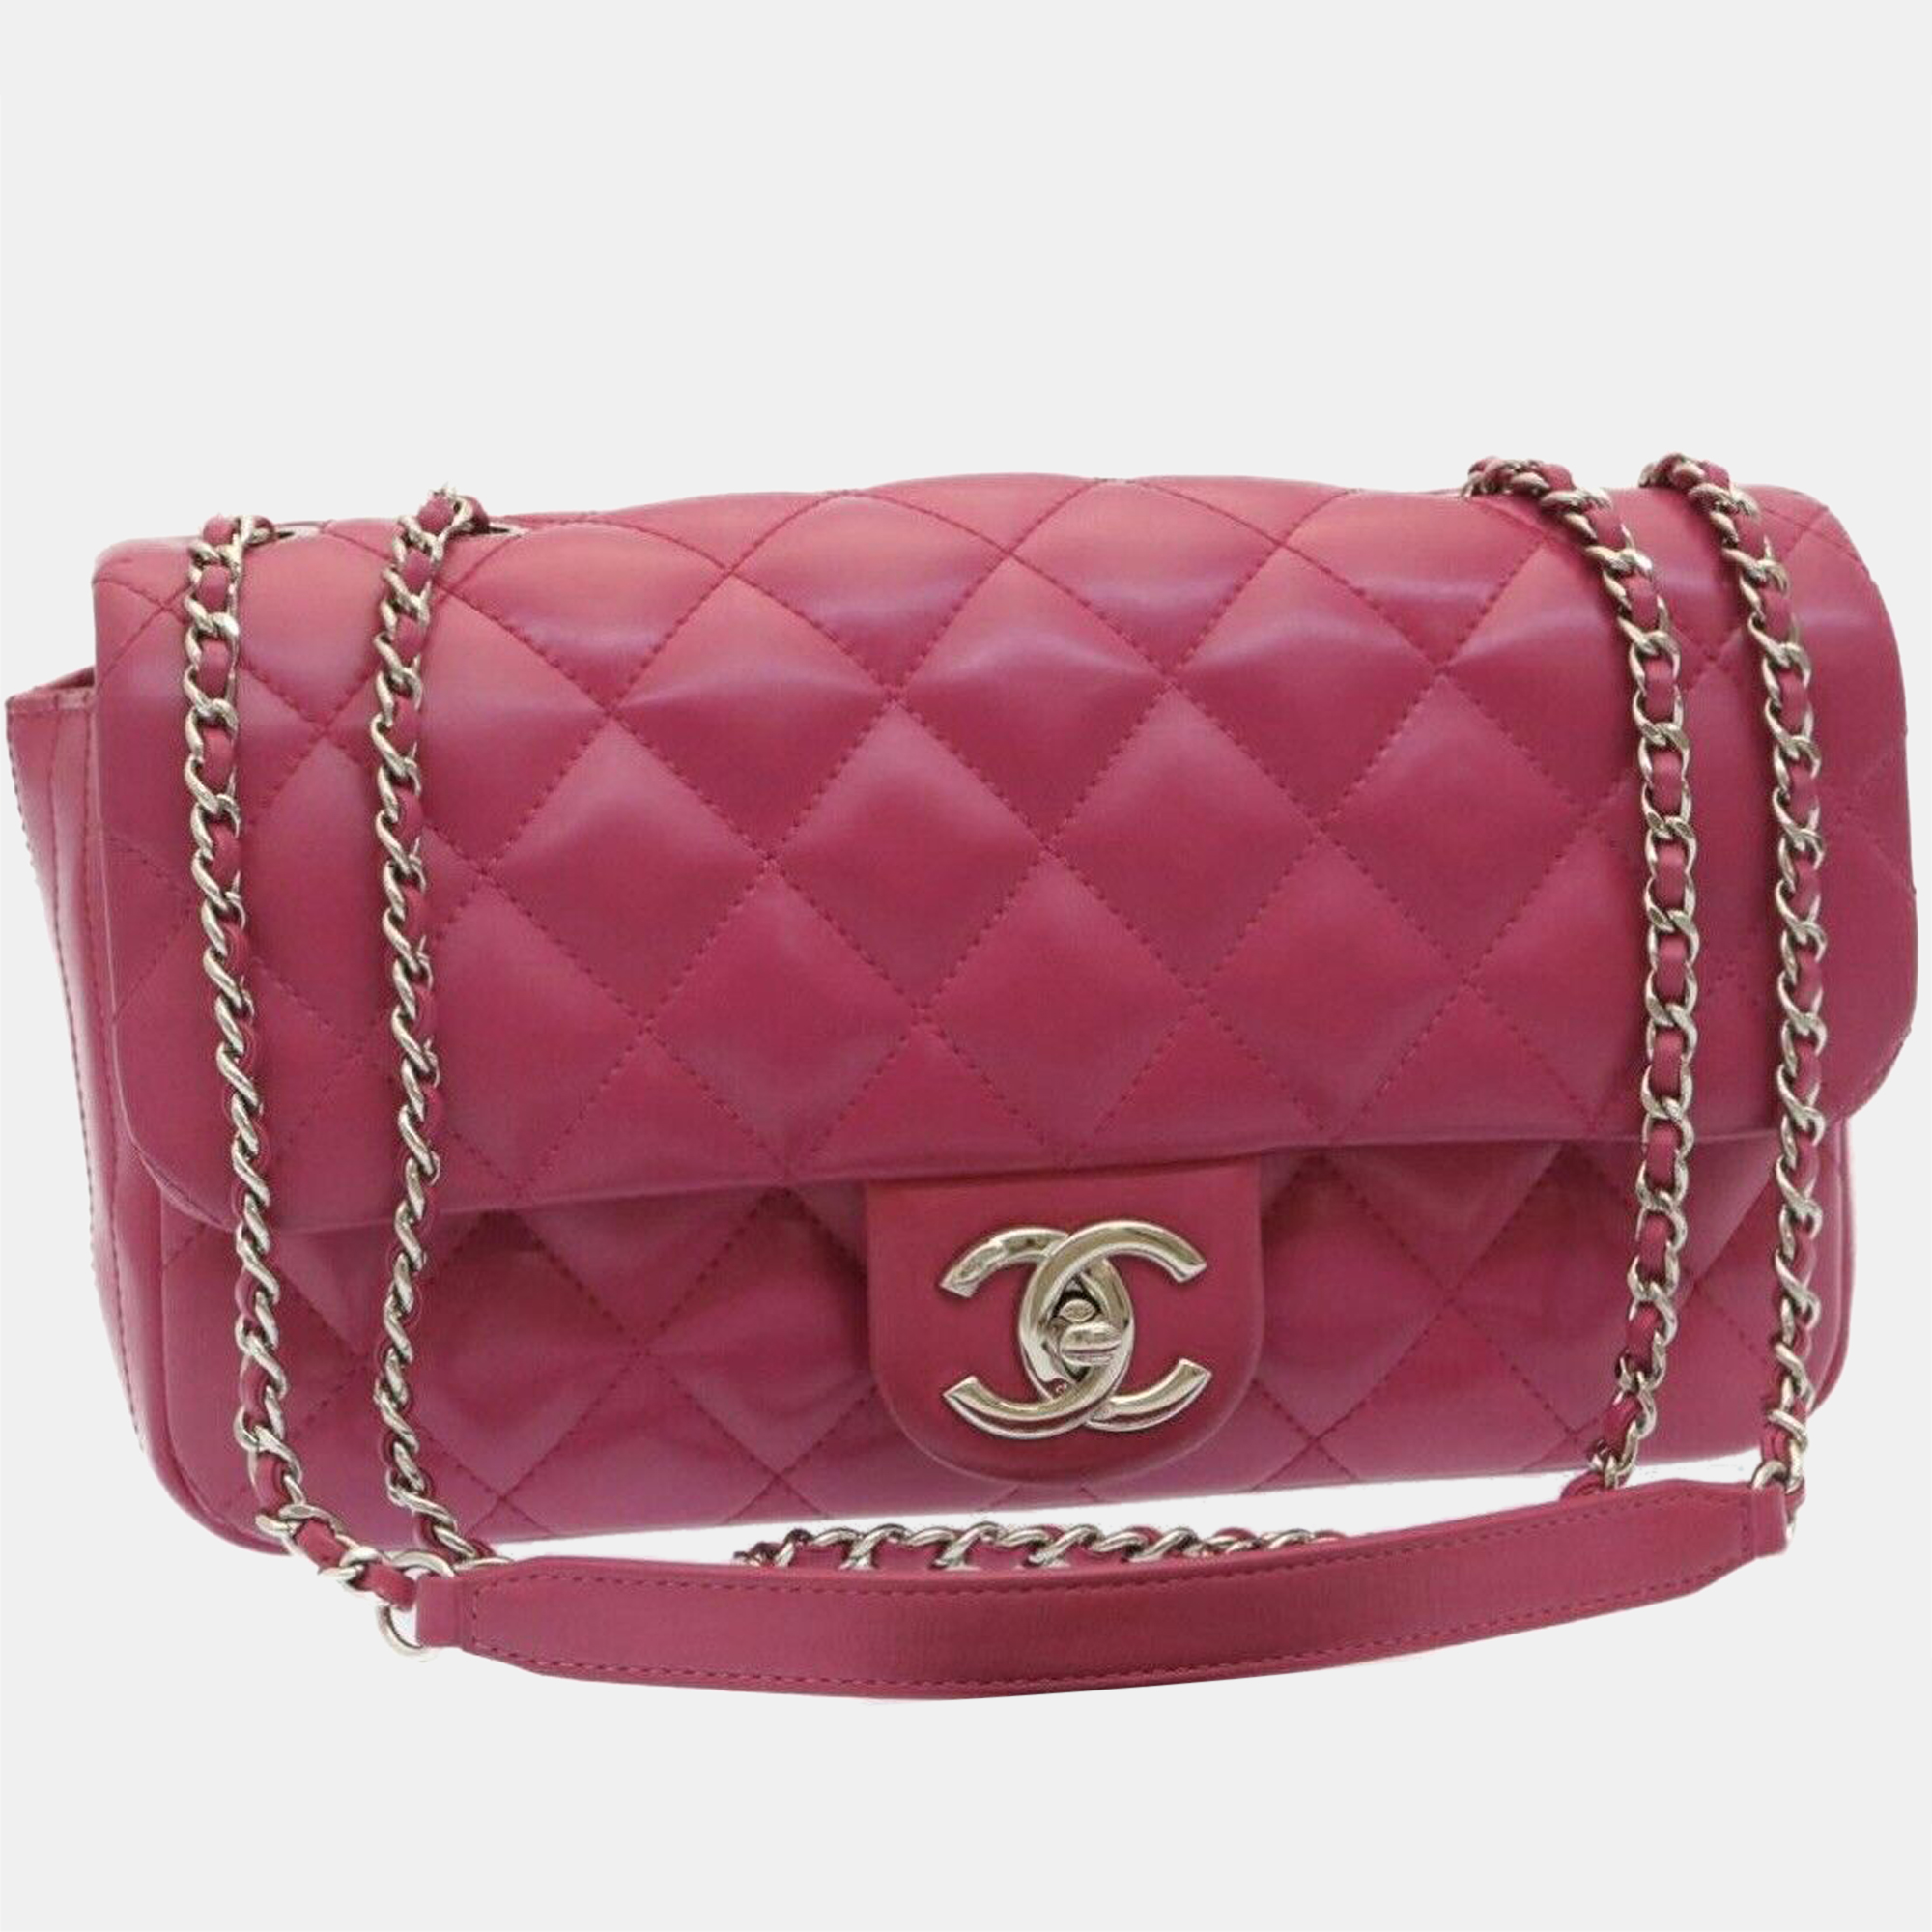 Pre-owned Chanel Pink Leather Flap Bag